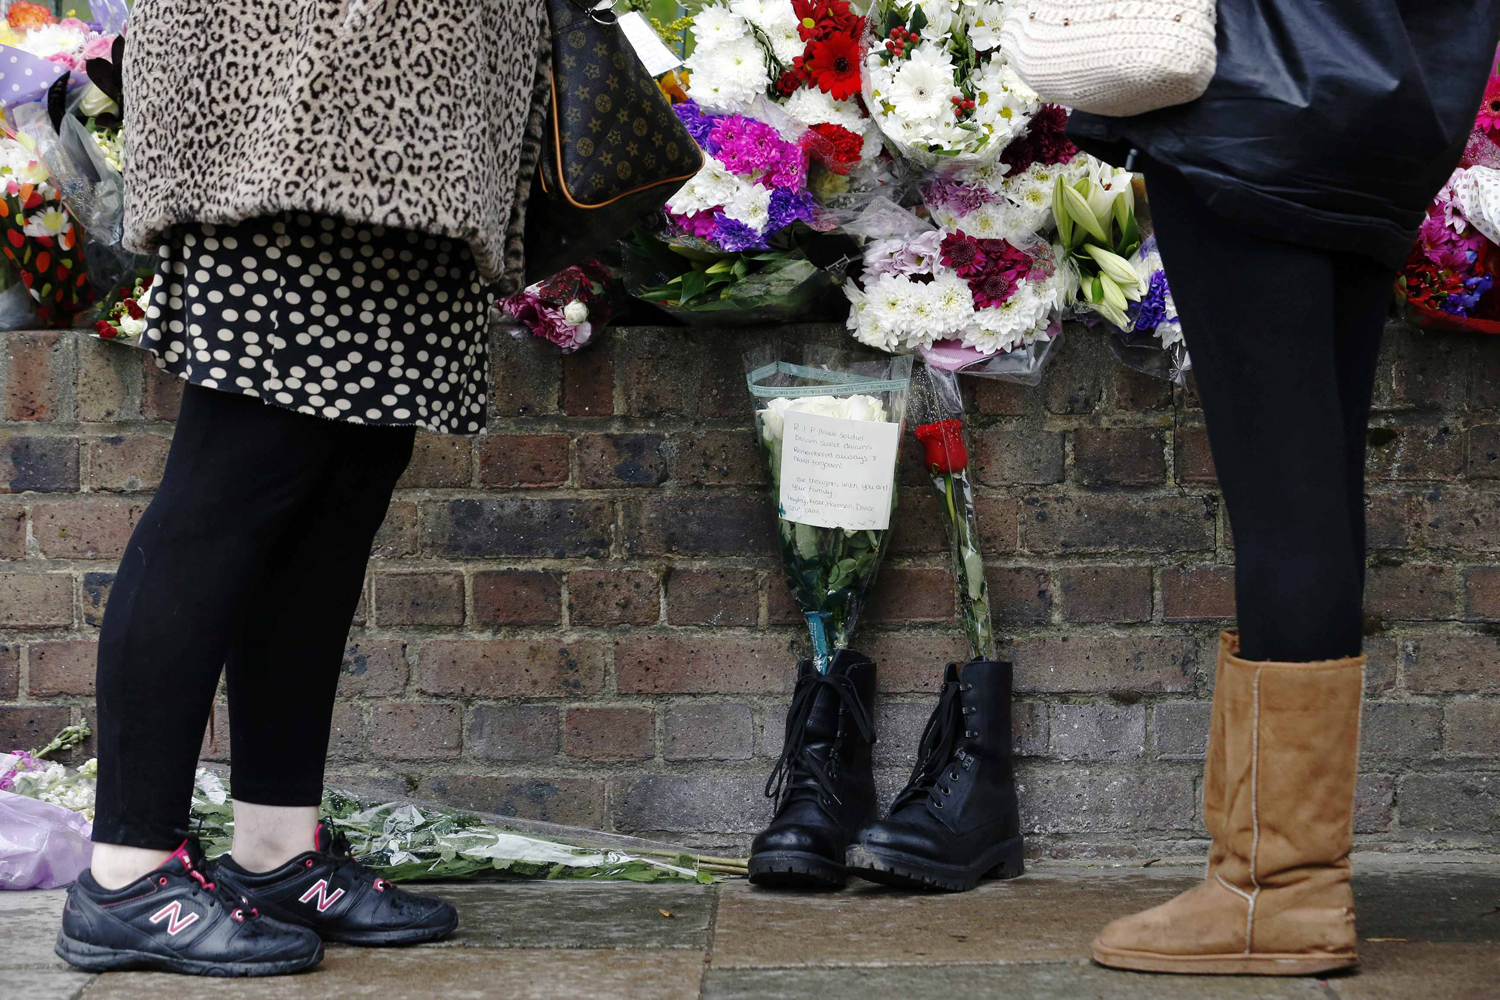 People stand near a pair of army boots and floral tributes for Drummer Lee Rigby near the scene of his killing in Woolwich